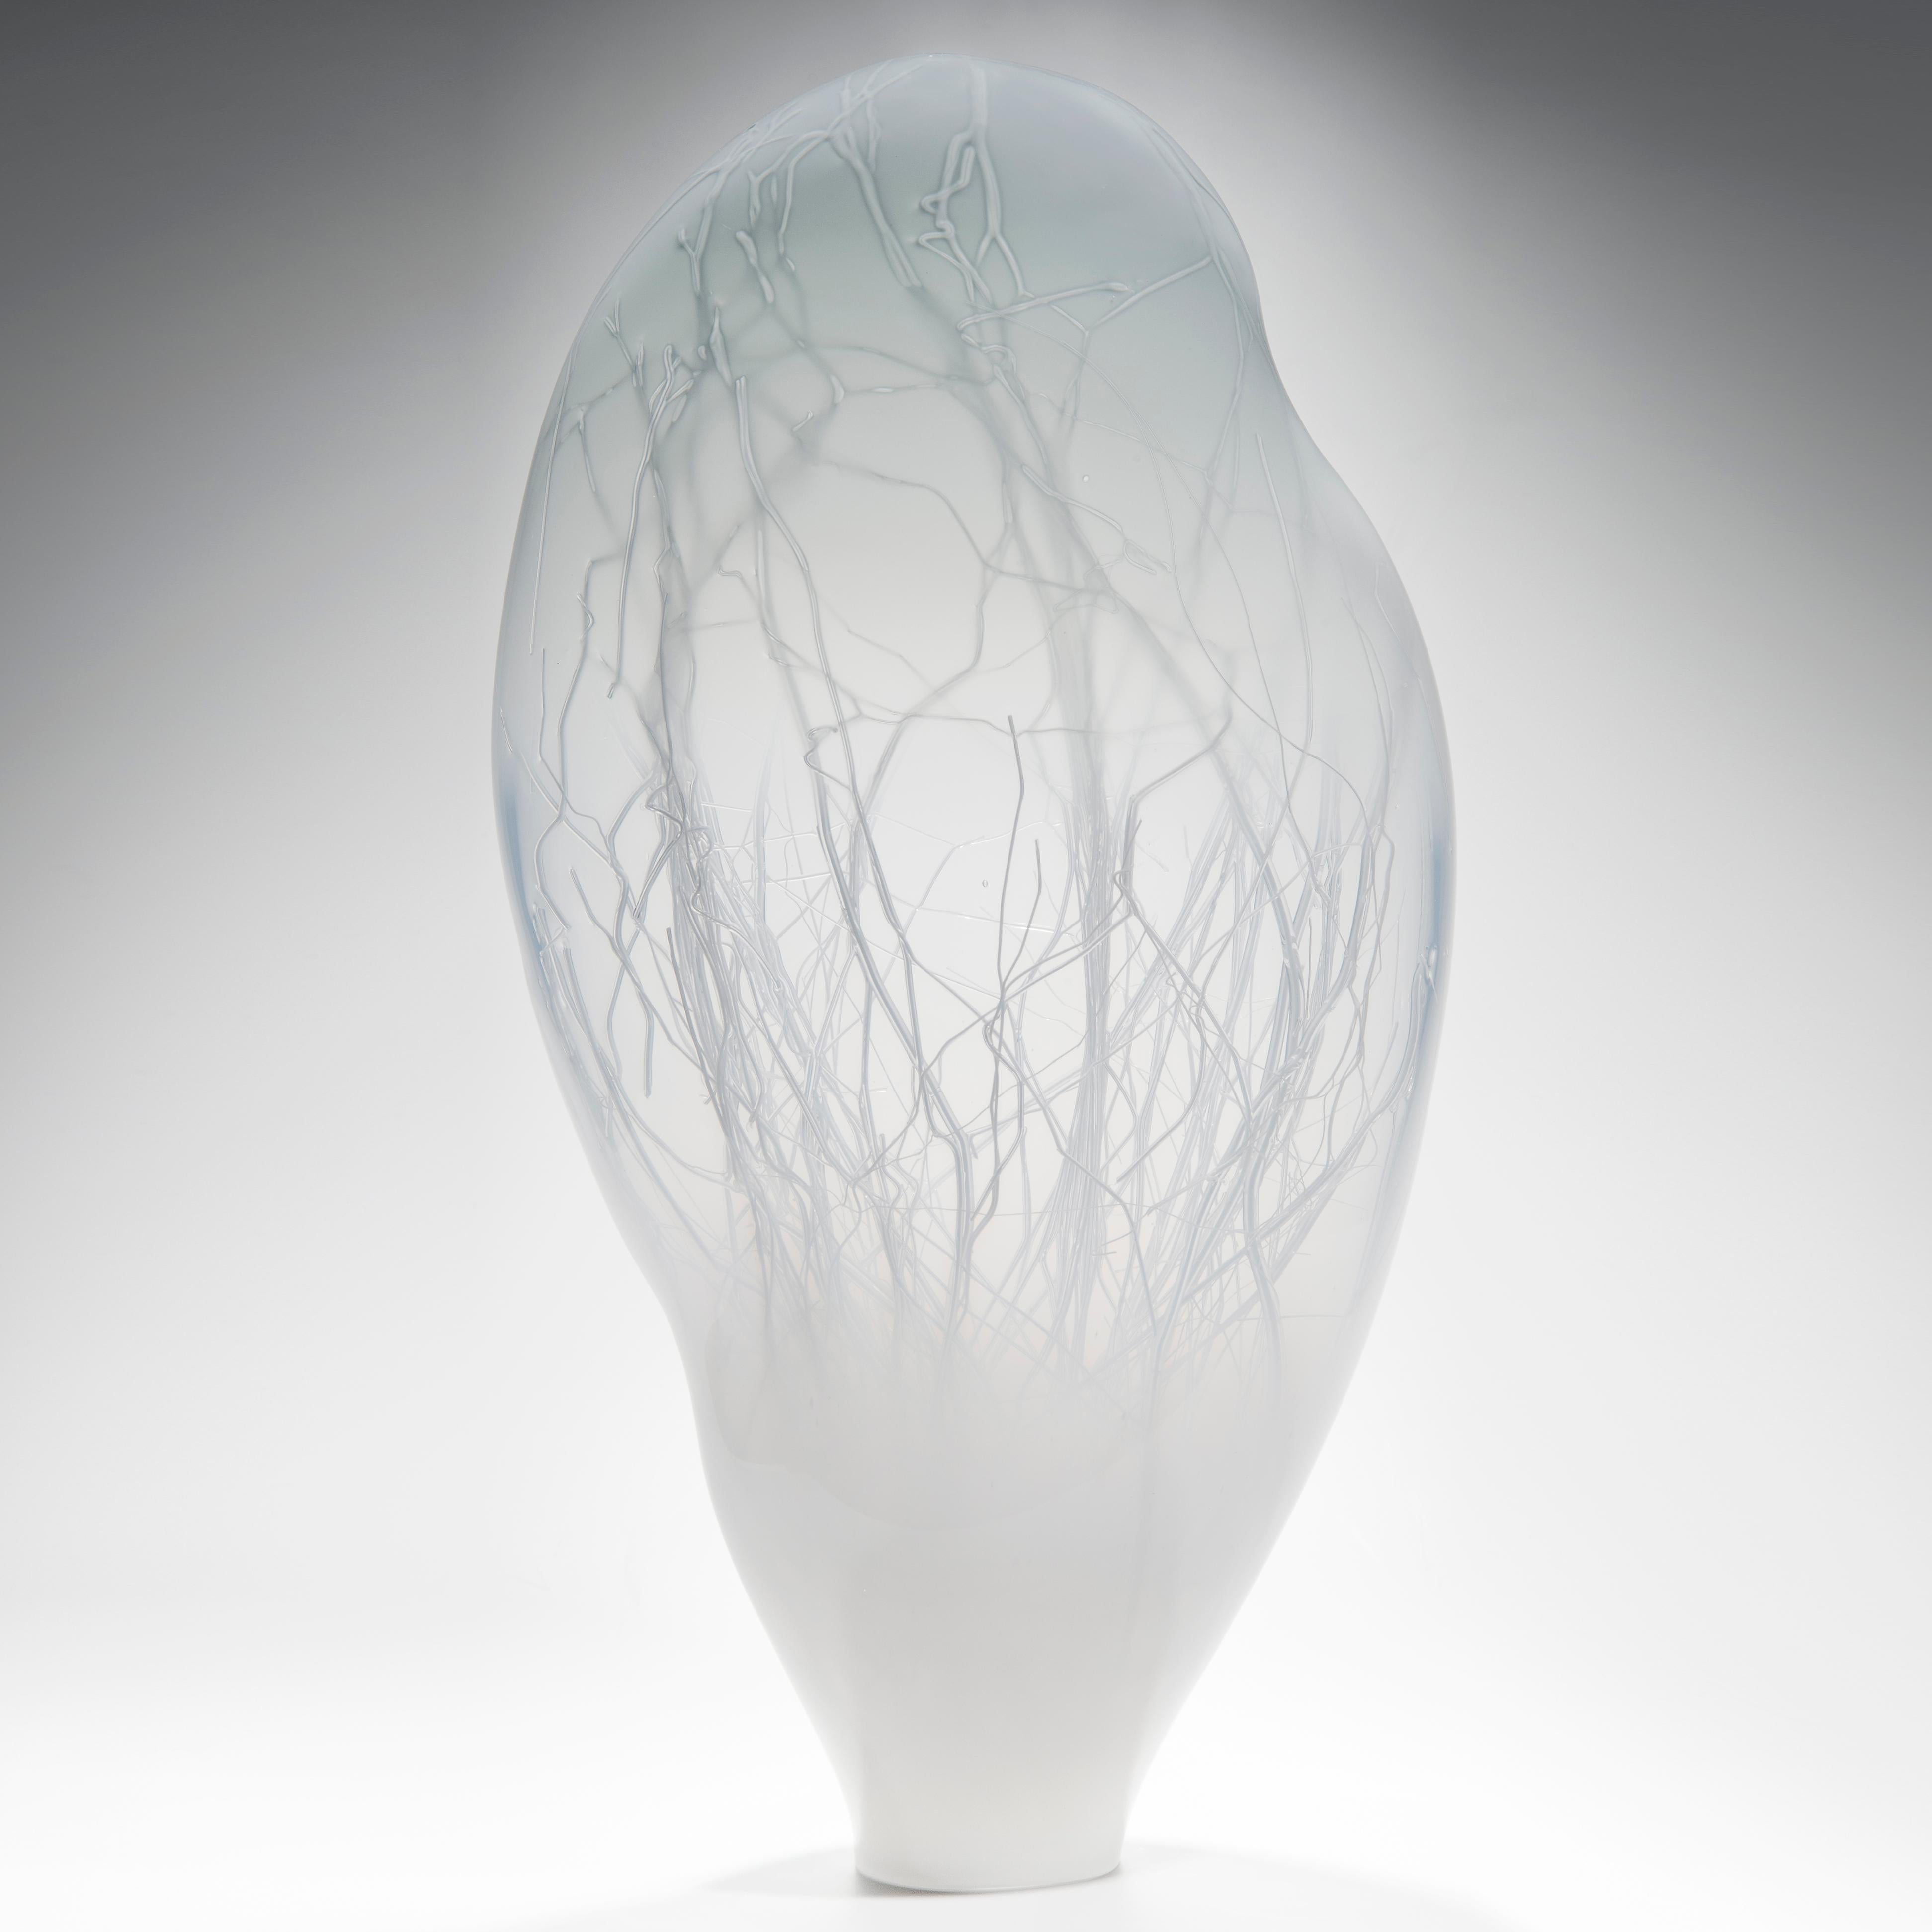 Penumbra in Grey is a unique glass sculpture in white and soft dove grey coloured glass by the collaborative artists Hanne Enemark (Danish) and Louis Thompson (British). The outer glass form contains a multitude of fine white canes of glass. Before